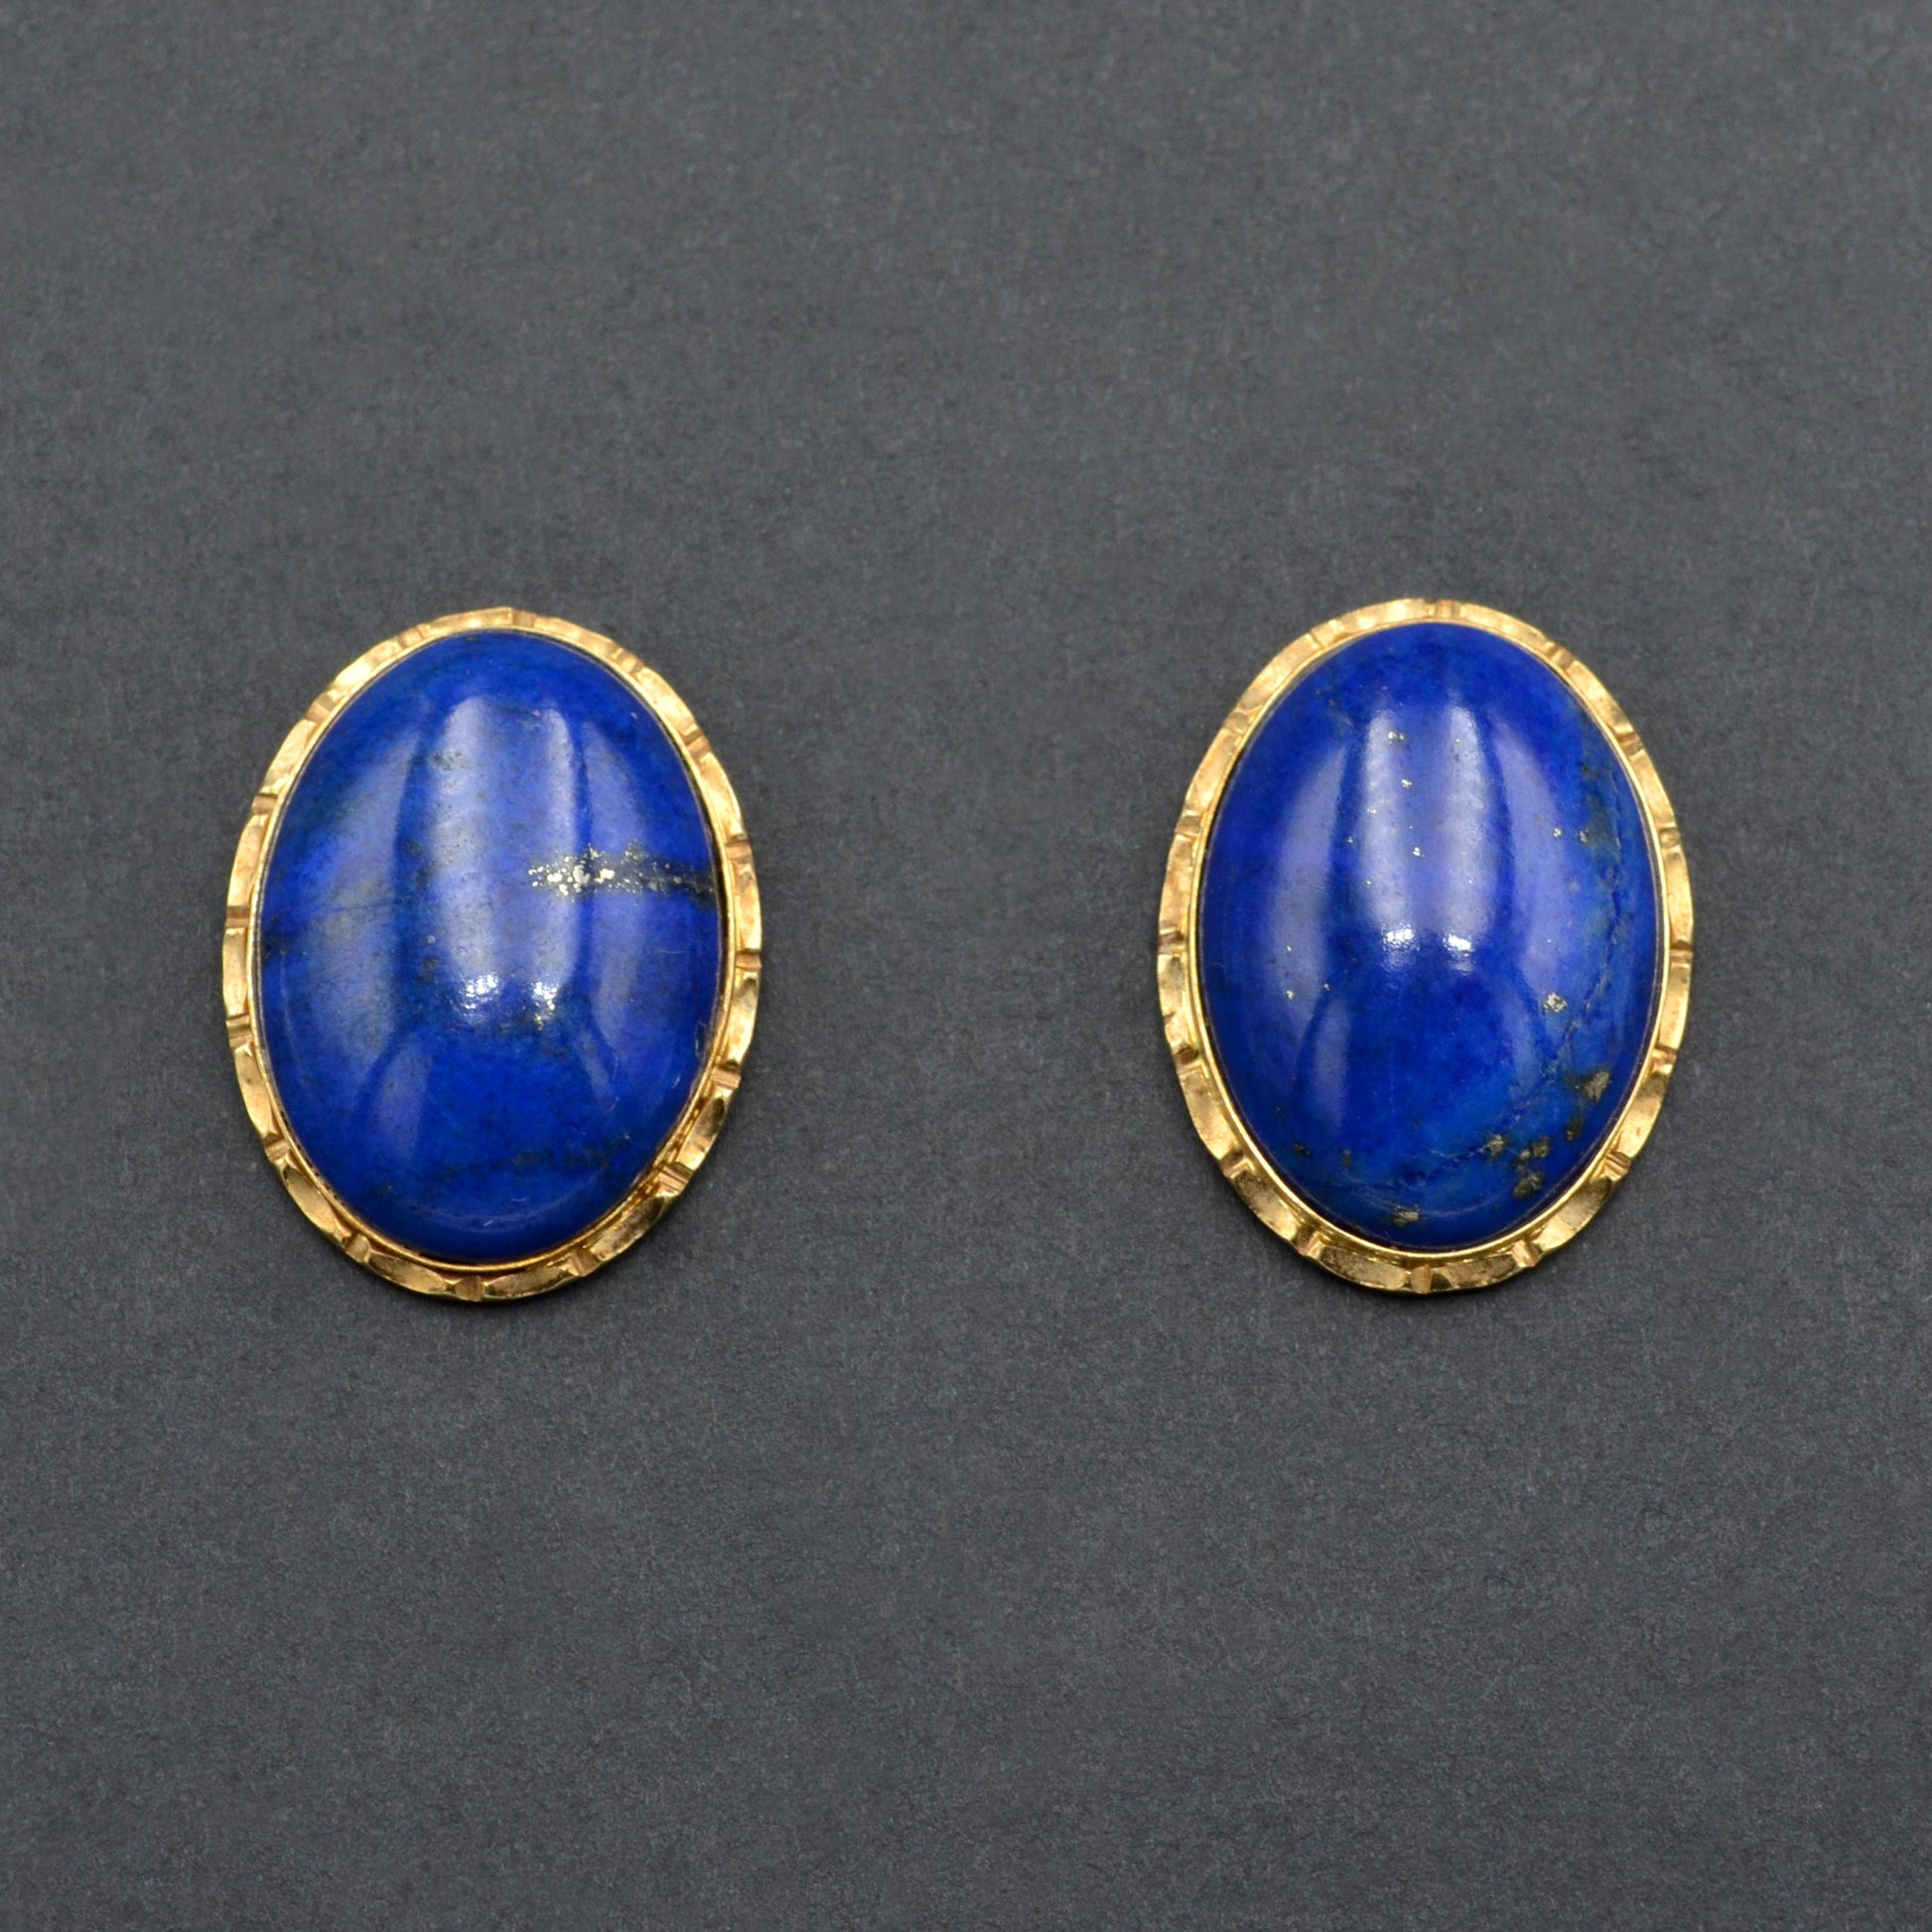 Vintage Lapis Lazuli and 14k Gold Earrings